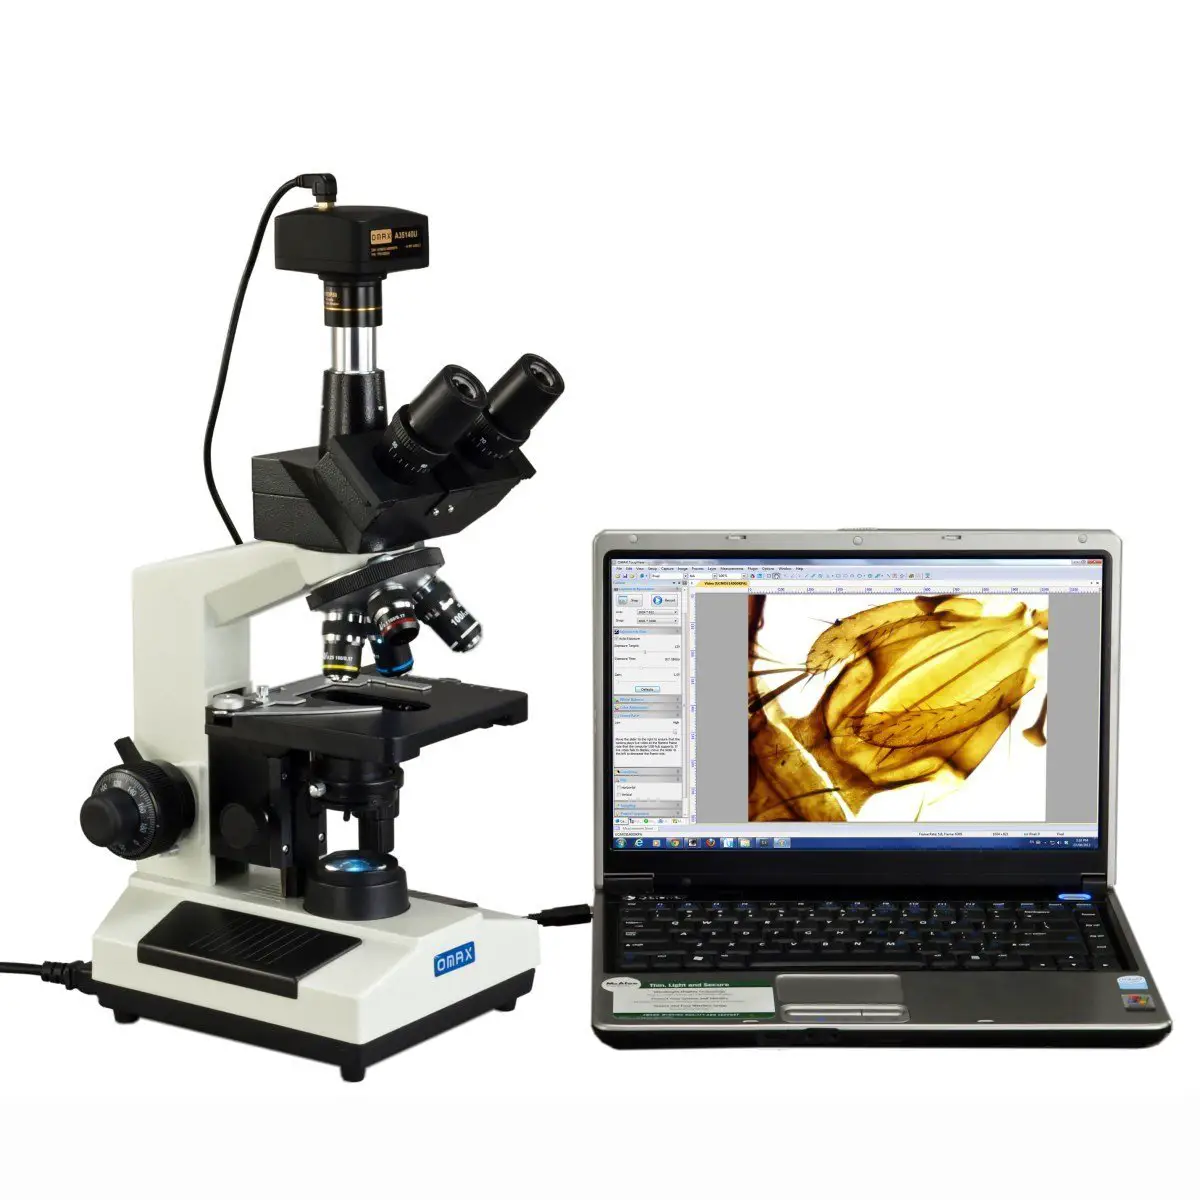 trinocular microscope buyer's guide - best to purchase, uses and